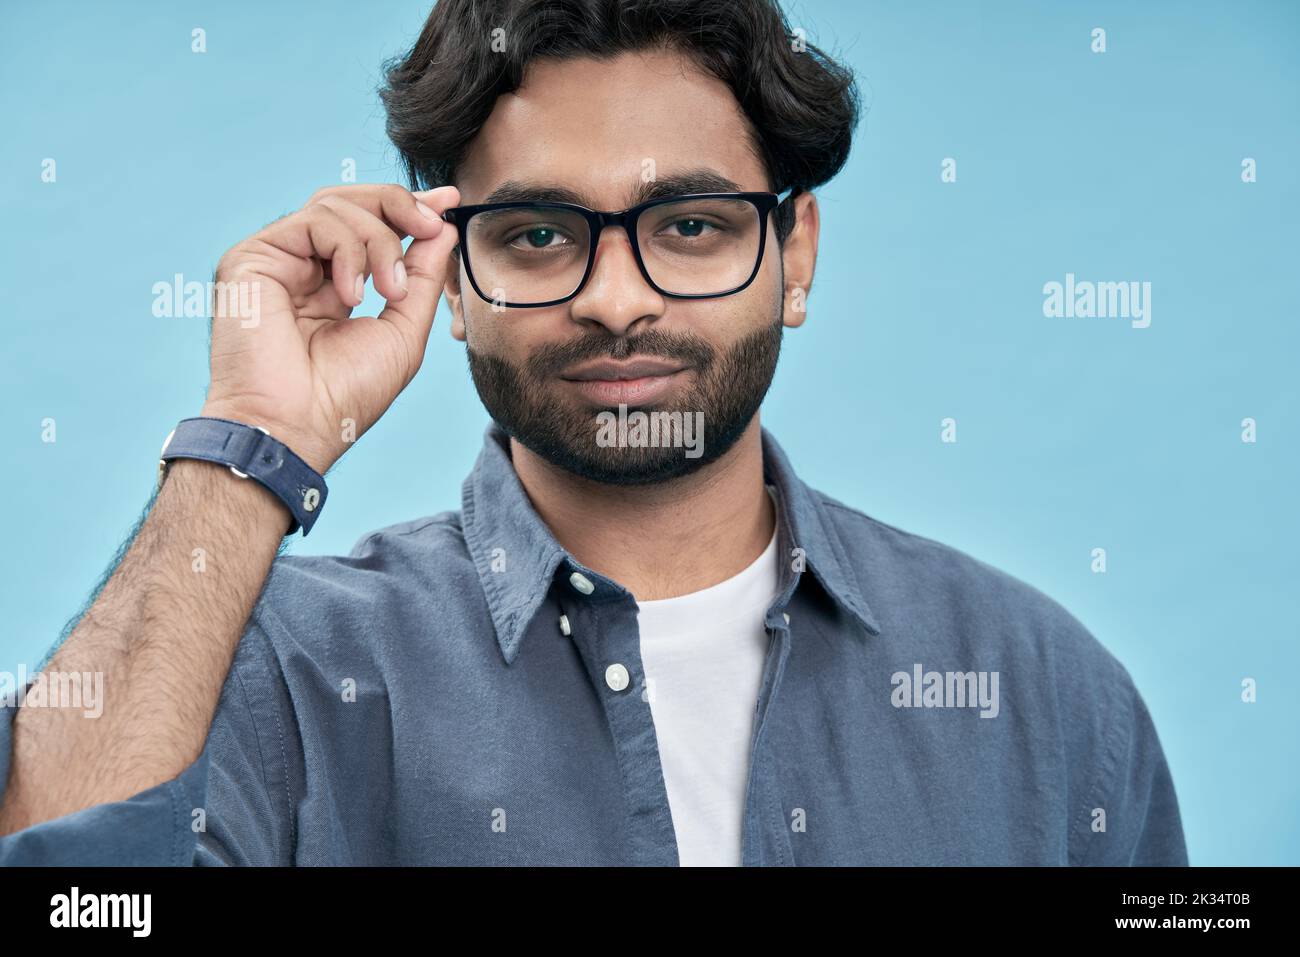 Confident arab young man wearing eyeglasses isolated on blue background. Stock Photo